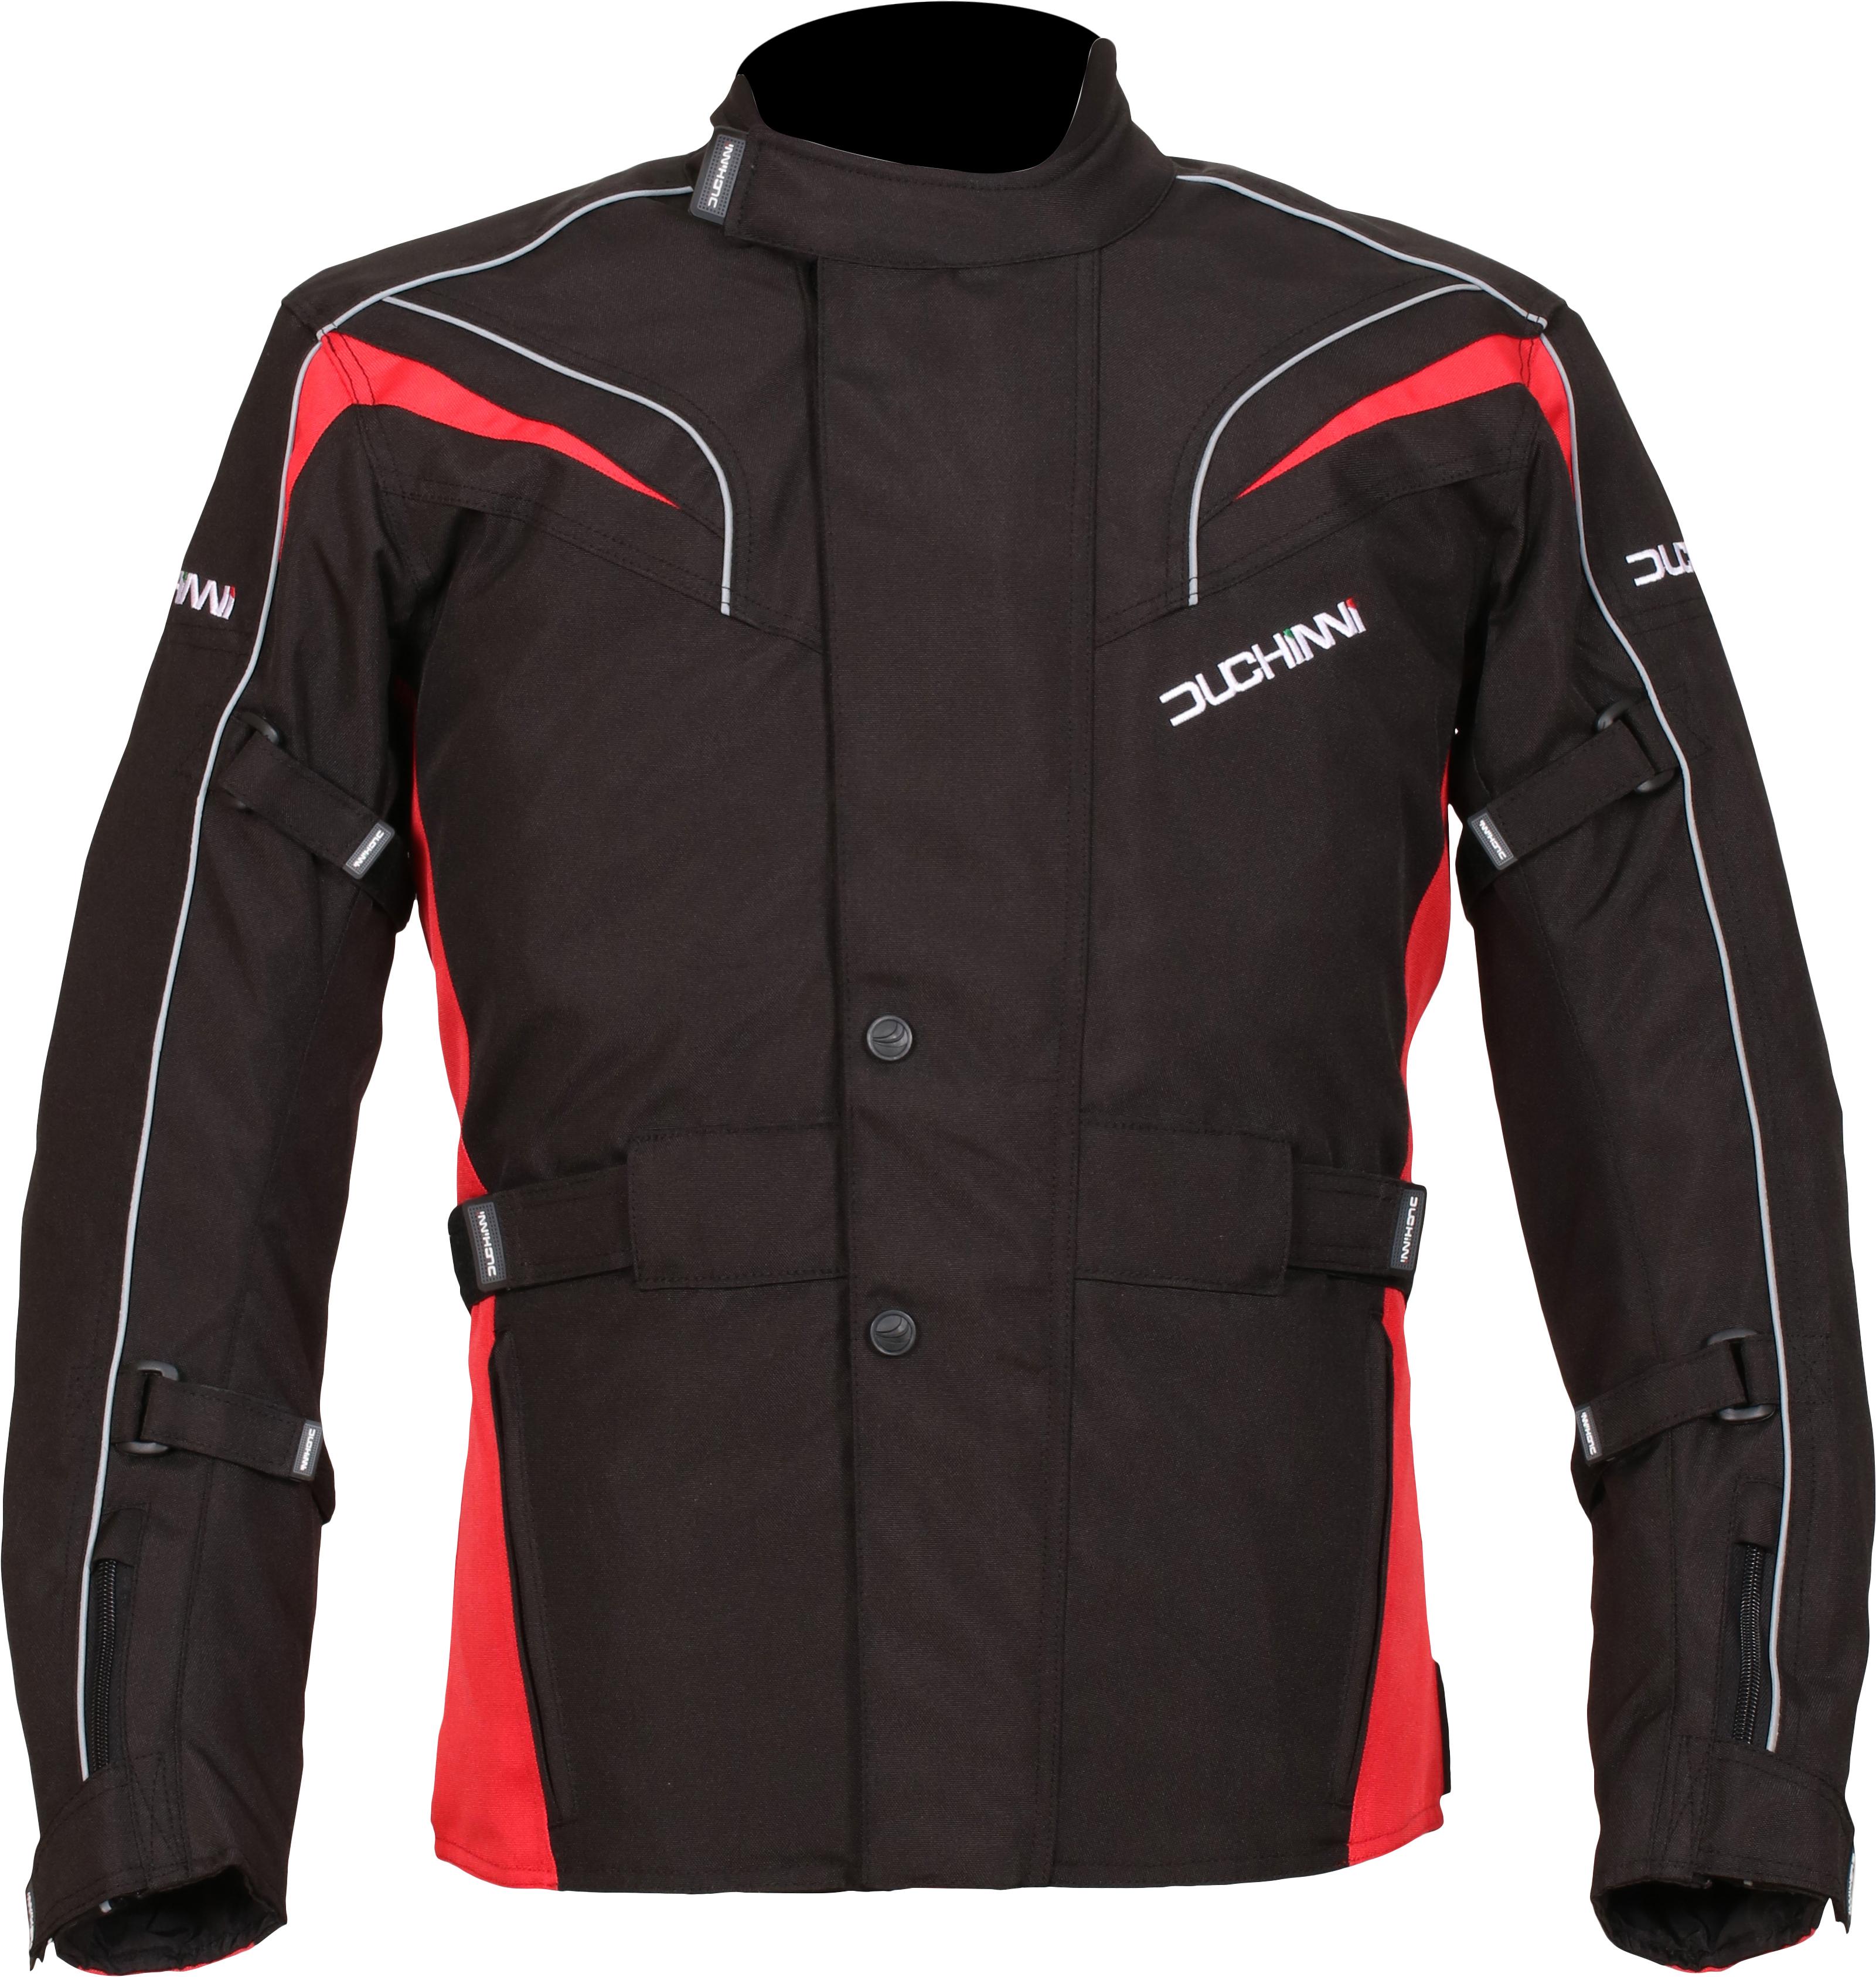 Duchinni Hurrican Motorcycle Jacket - Black And Red, 3Xl